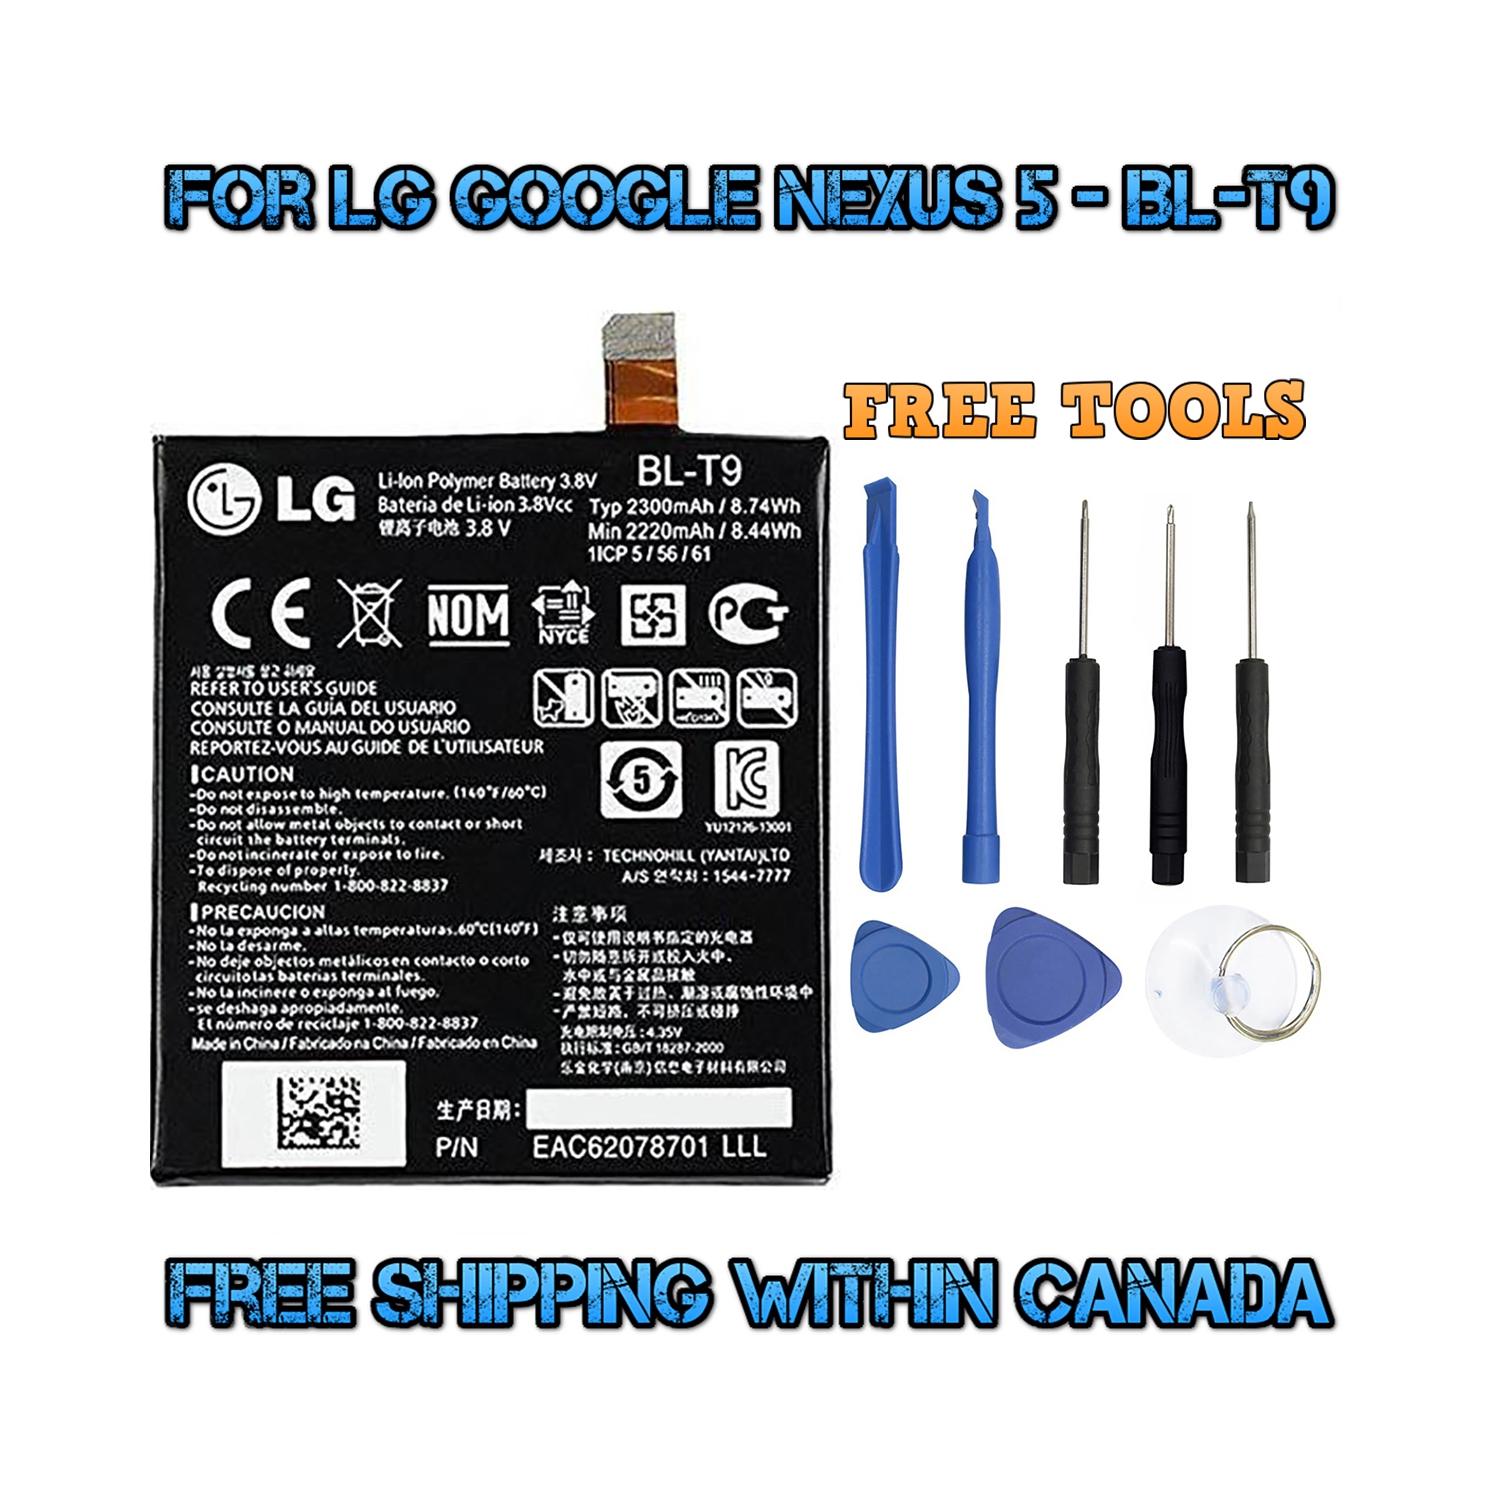 New OEM Replacement Battery Model BL-T9 2300 mAh for LG Google Nexus 5 D820 D821 - (FREE SHIPPING)